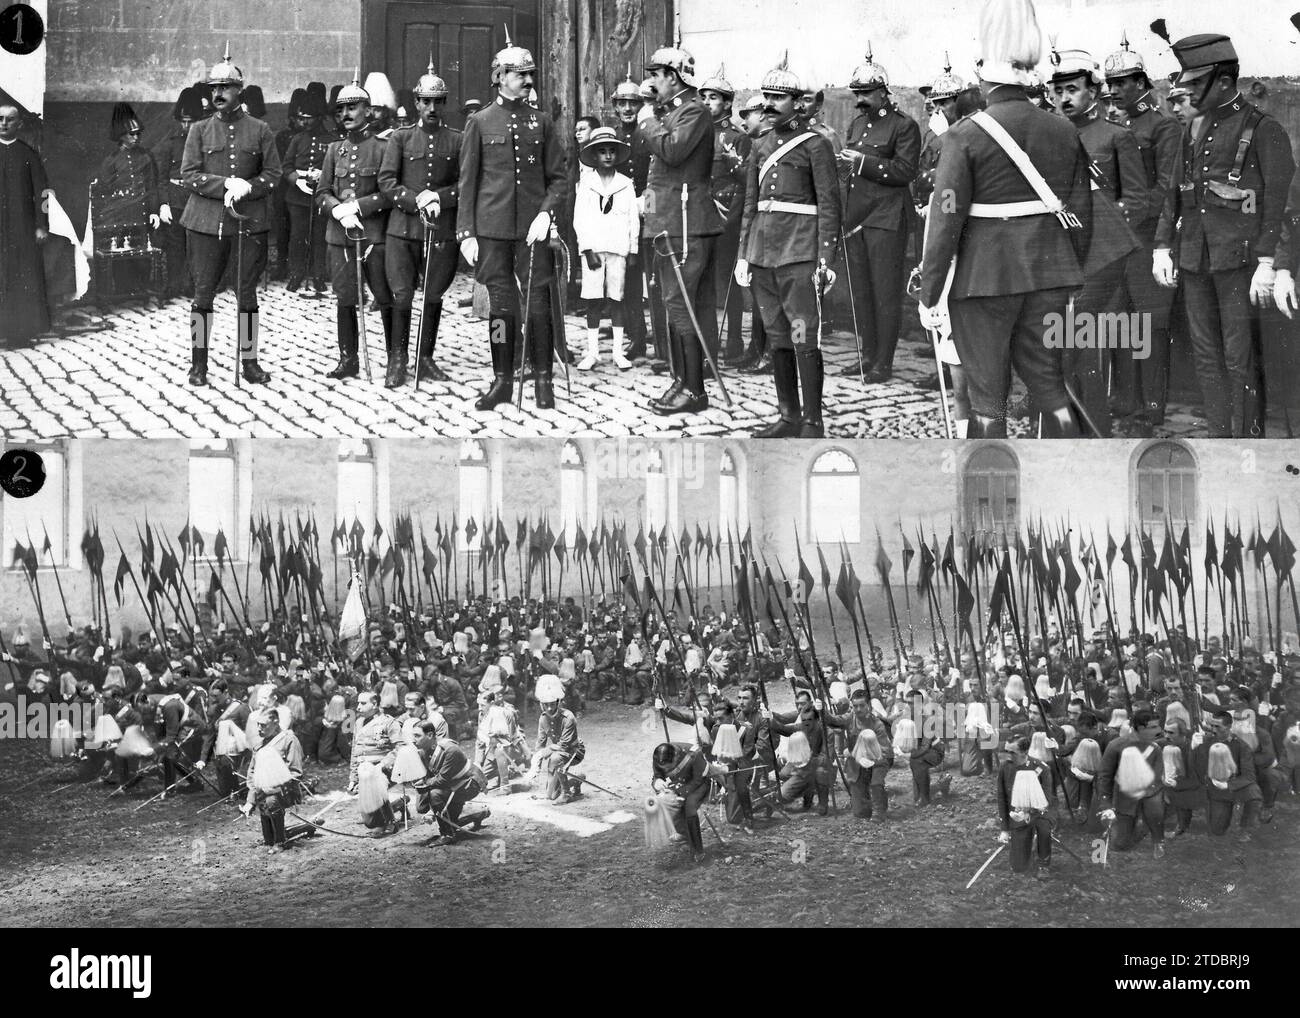 07/24/1918. The festival of Santiago Apostol in Madrid. 1.-HRH the Infante D. Fernando Conversing after the campaign mass with the officers of the Lanceros del Príncipe regiment, of which he is a colonel. 2.-The Soldiers of the Queen's Lancers Regiment Listening to the Mass Celebrated Yesterday Tomorrow at the Count-Duke's Barracks. Credit: Album / Archivo ABC / Julio Duque Stock Photo